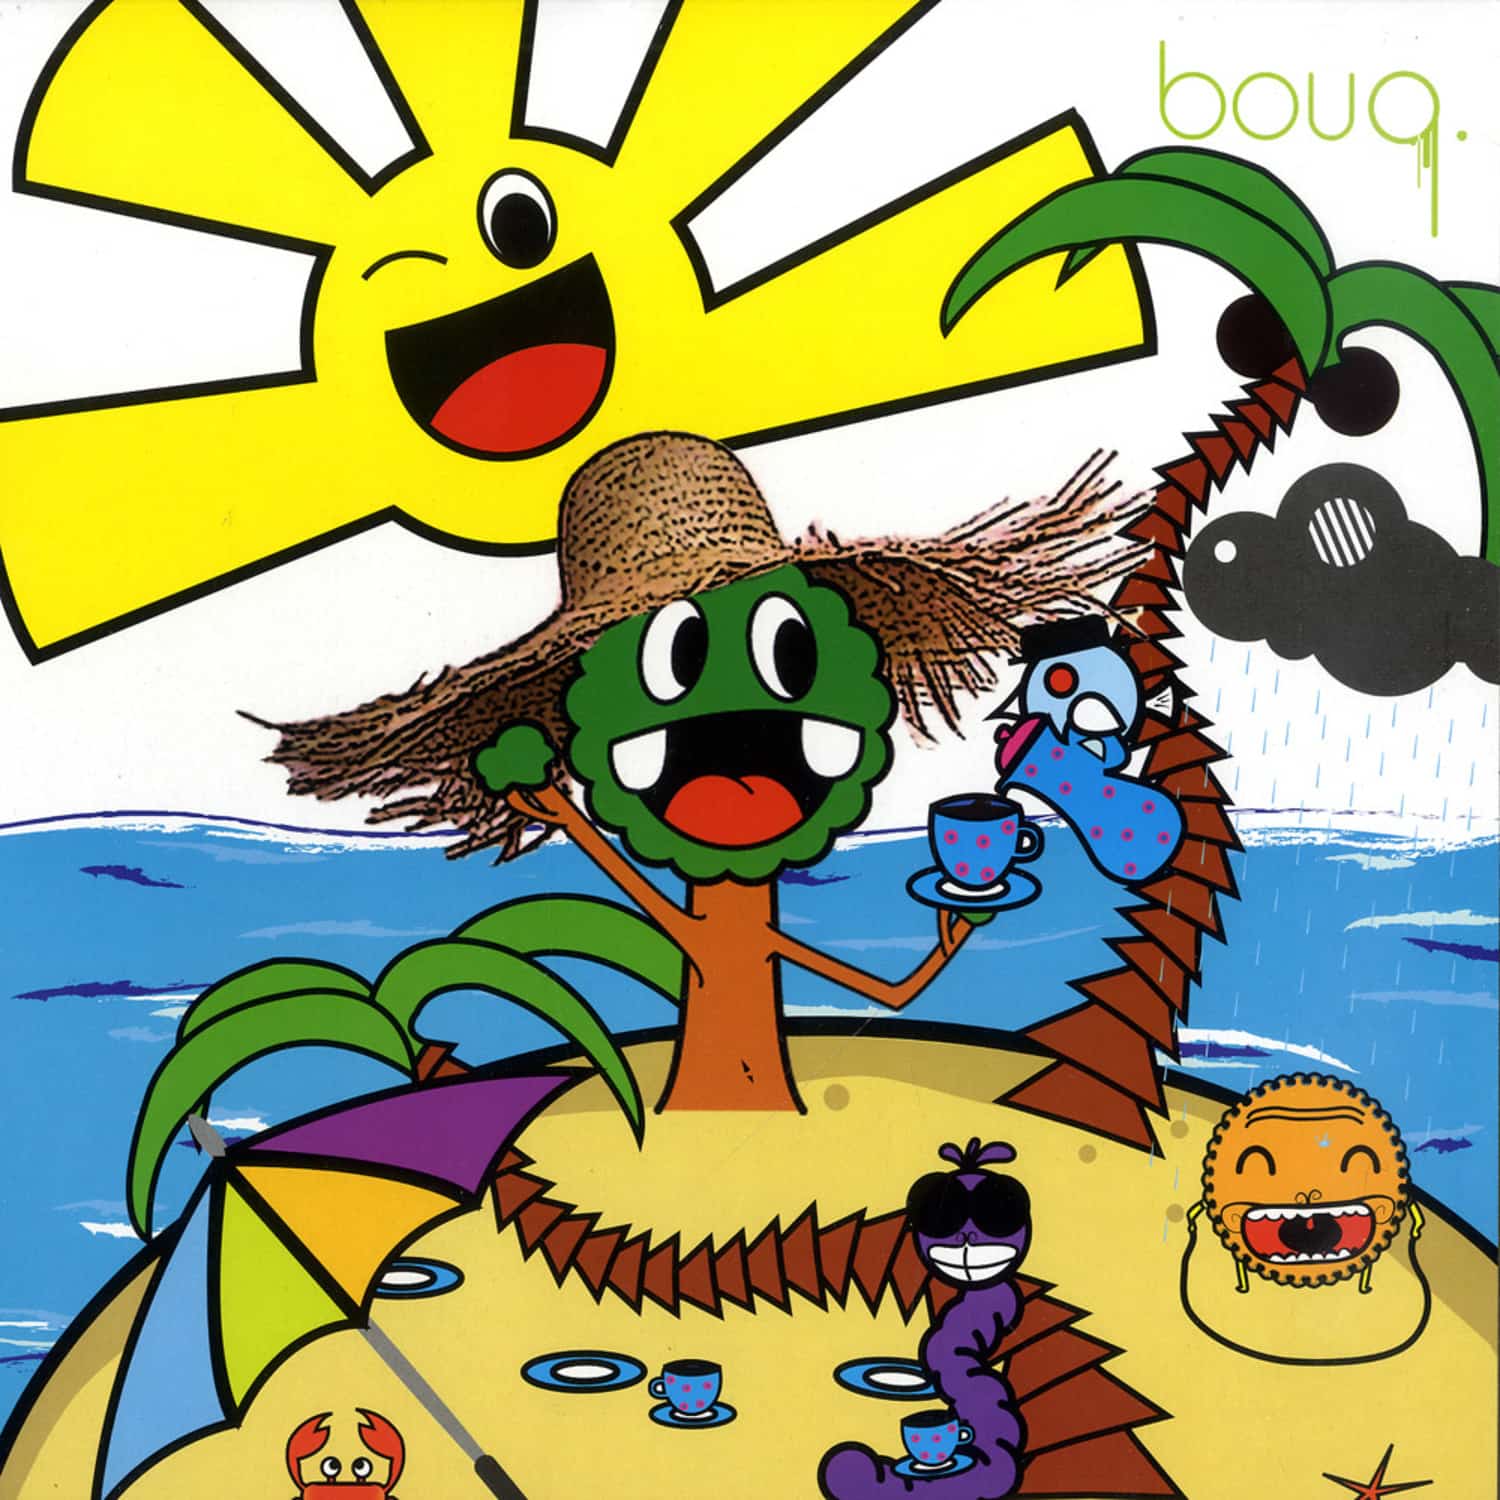 Bouq.Family and Friends - PART ONE